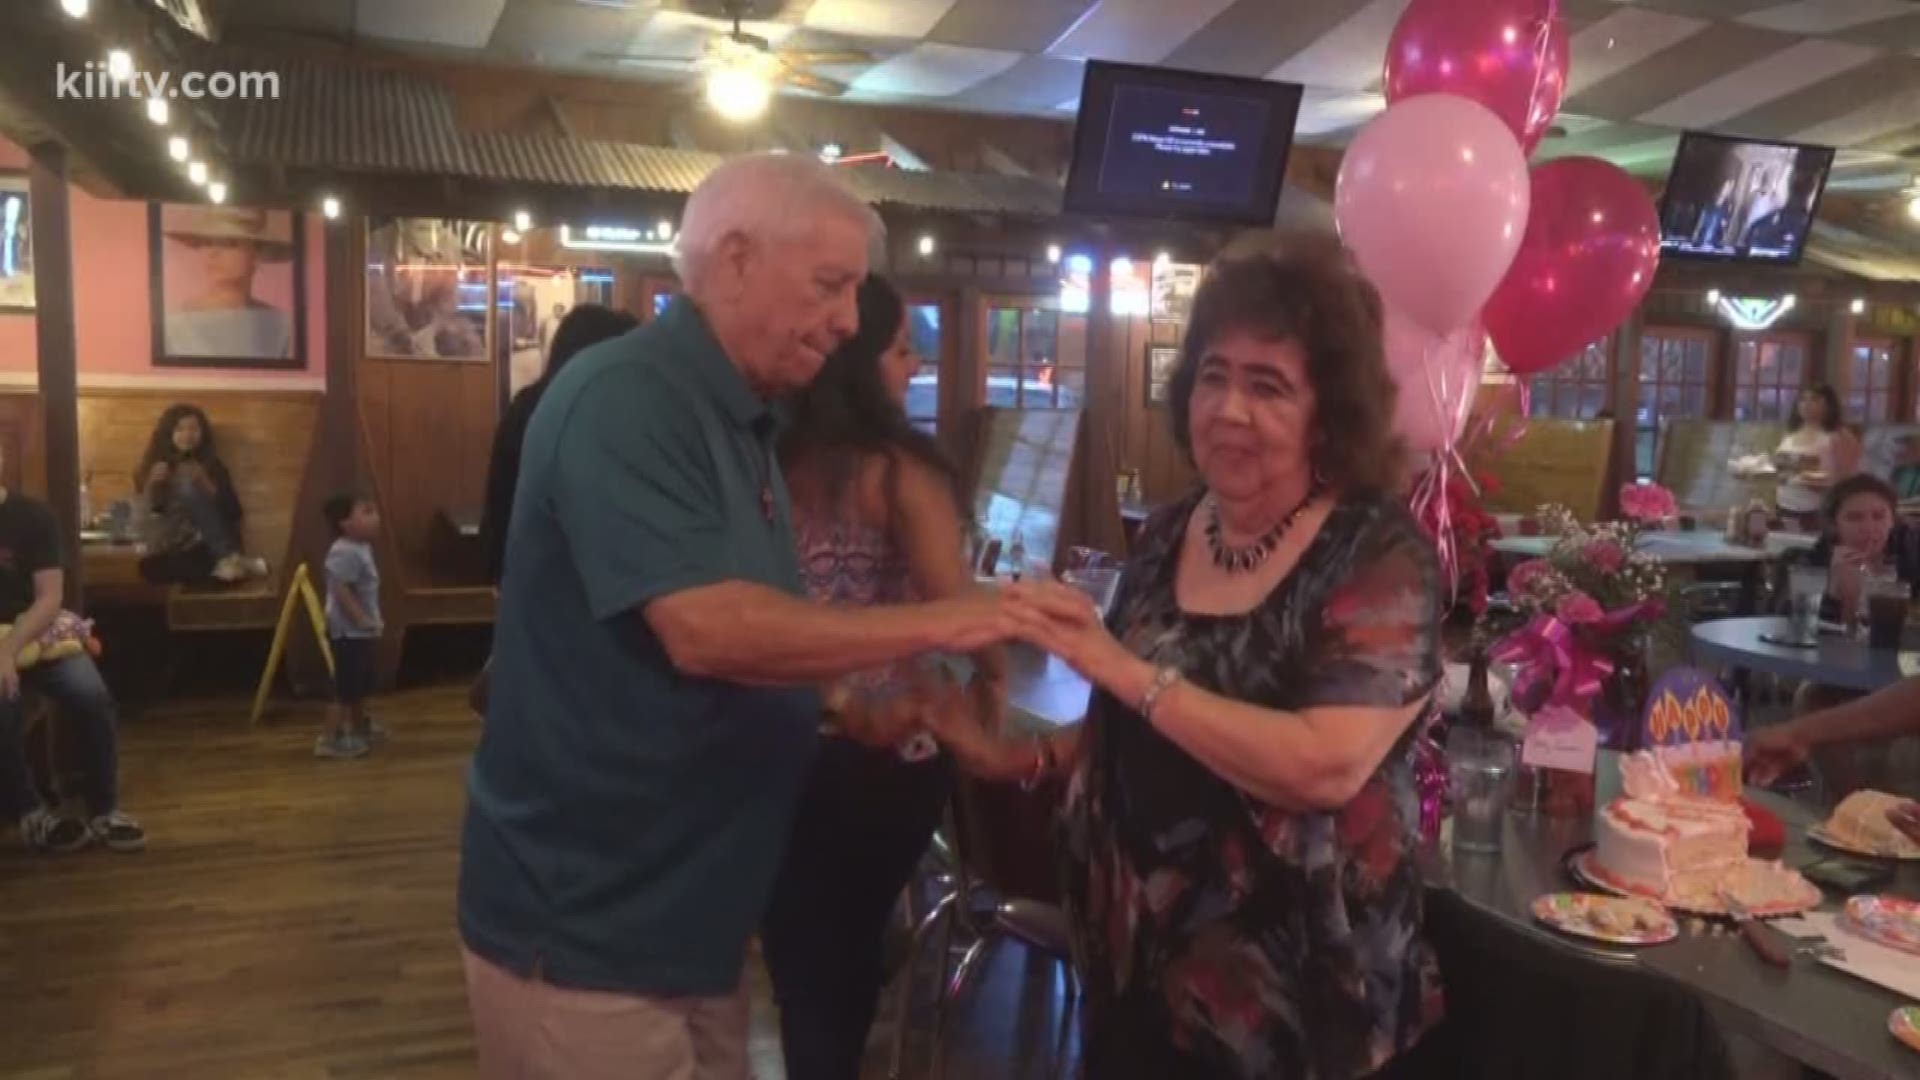 A Corpus Christi woman isn't letting her age stop her from working hard and having fun.